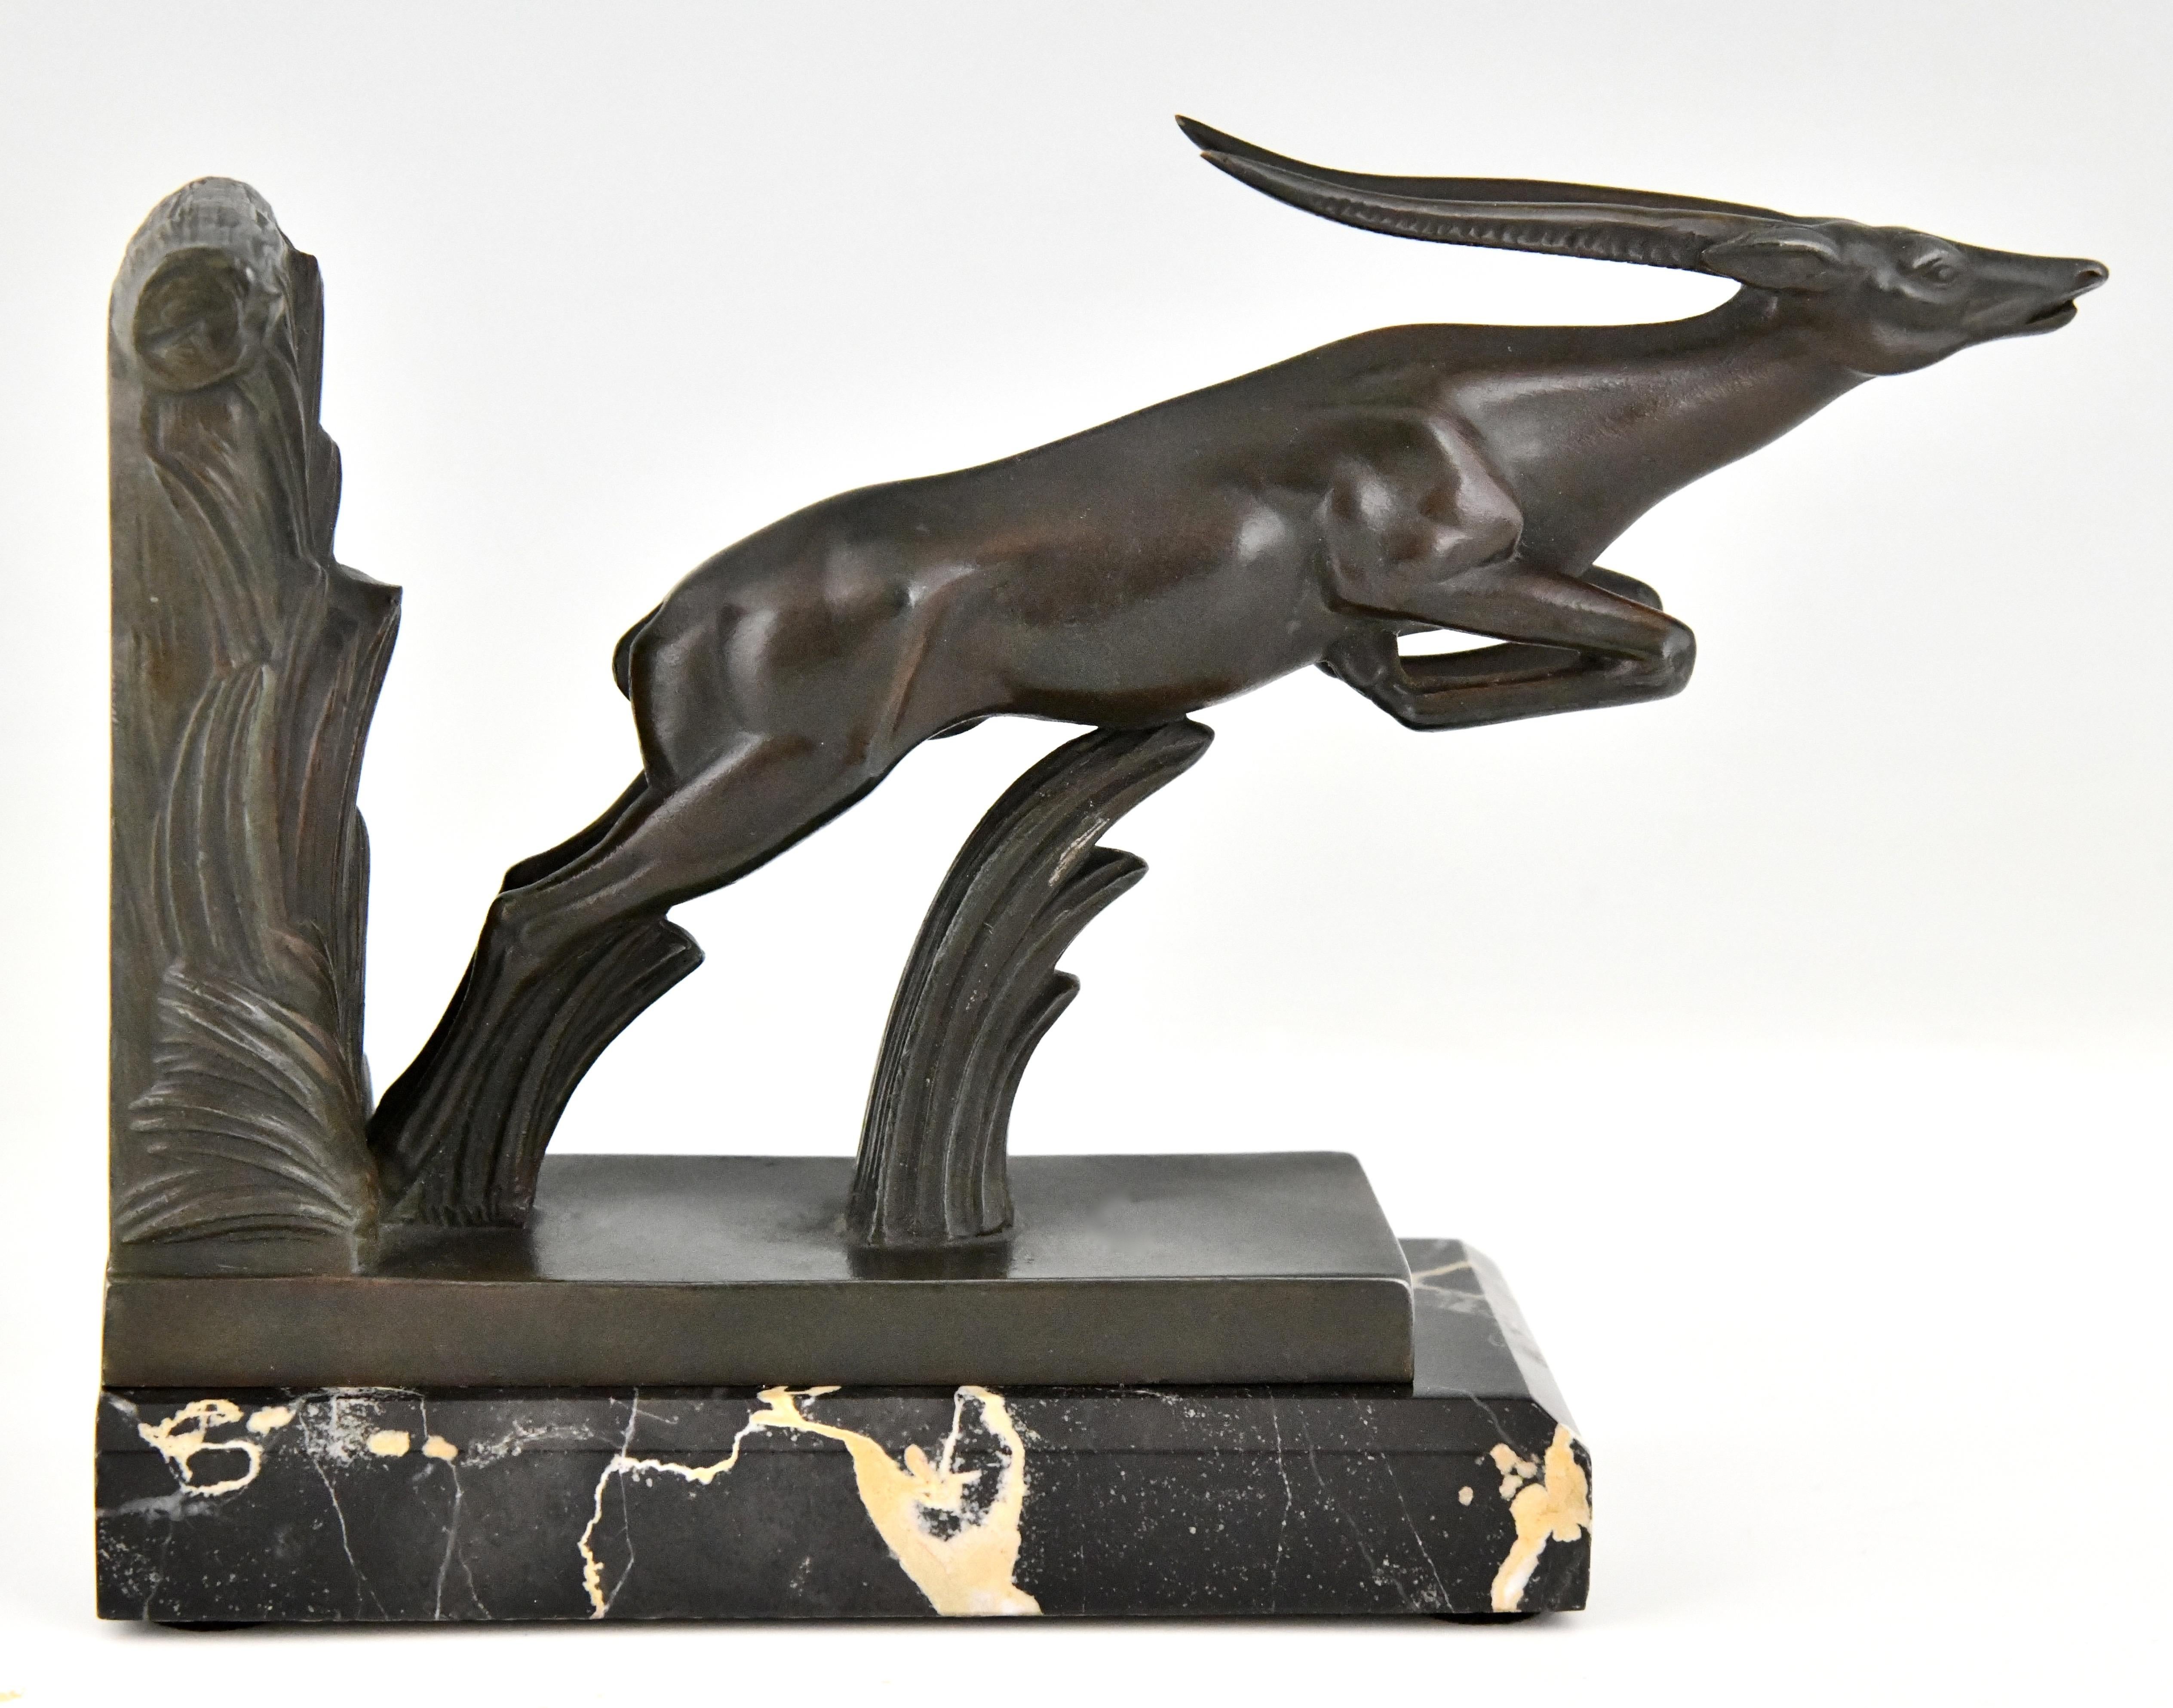  Art Deco Leaping Deer Bookends by Max Le Verrier 1930 France In Good Condition For Sale In Antwerp, BE